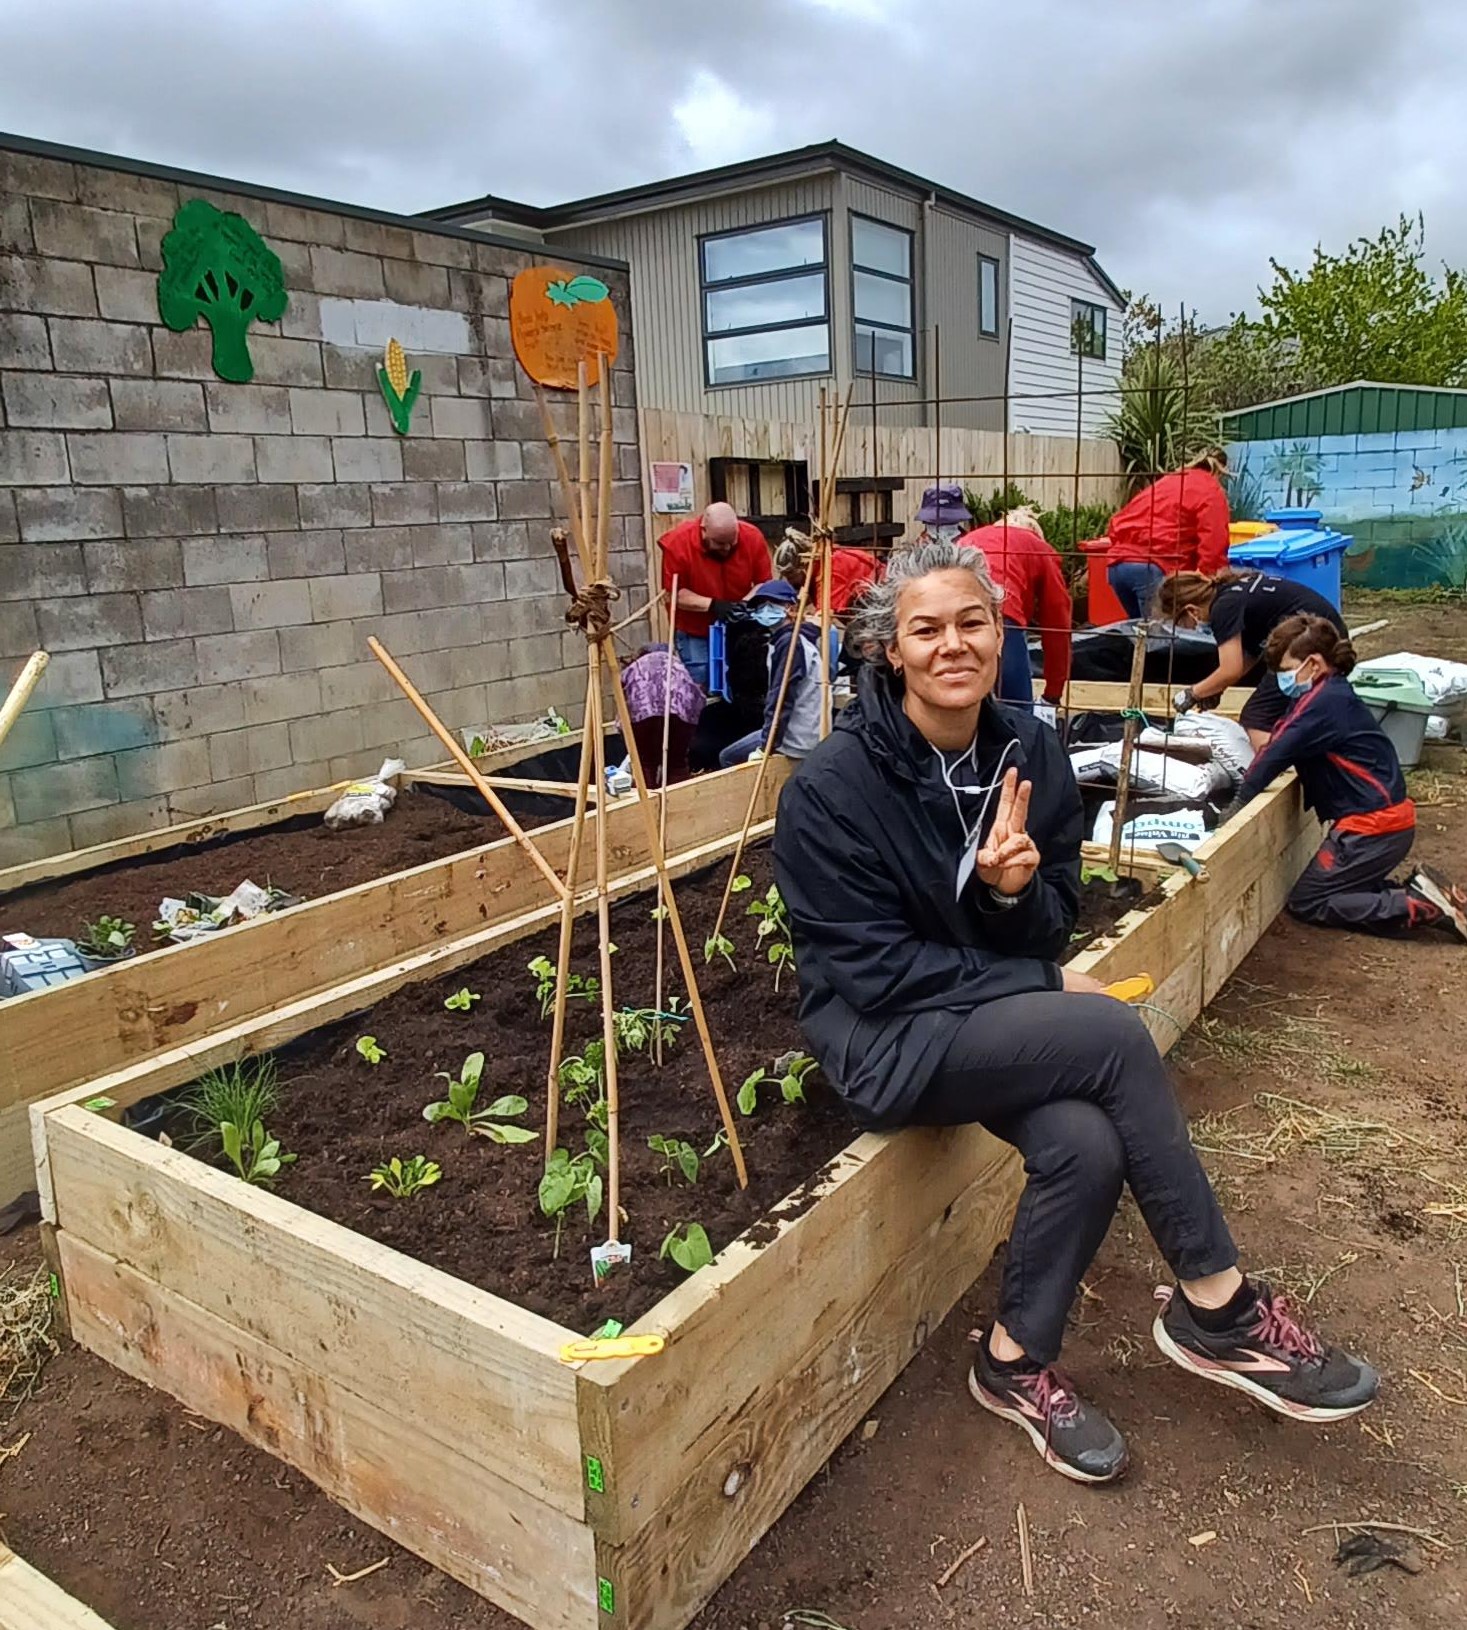 Garden to Table’s Candace Weir earned a sit down after working with Pakuranga Heights School pupils and Bunnings corporate staff to build new gardens at the school.